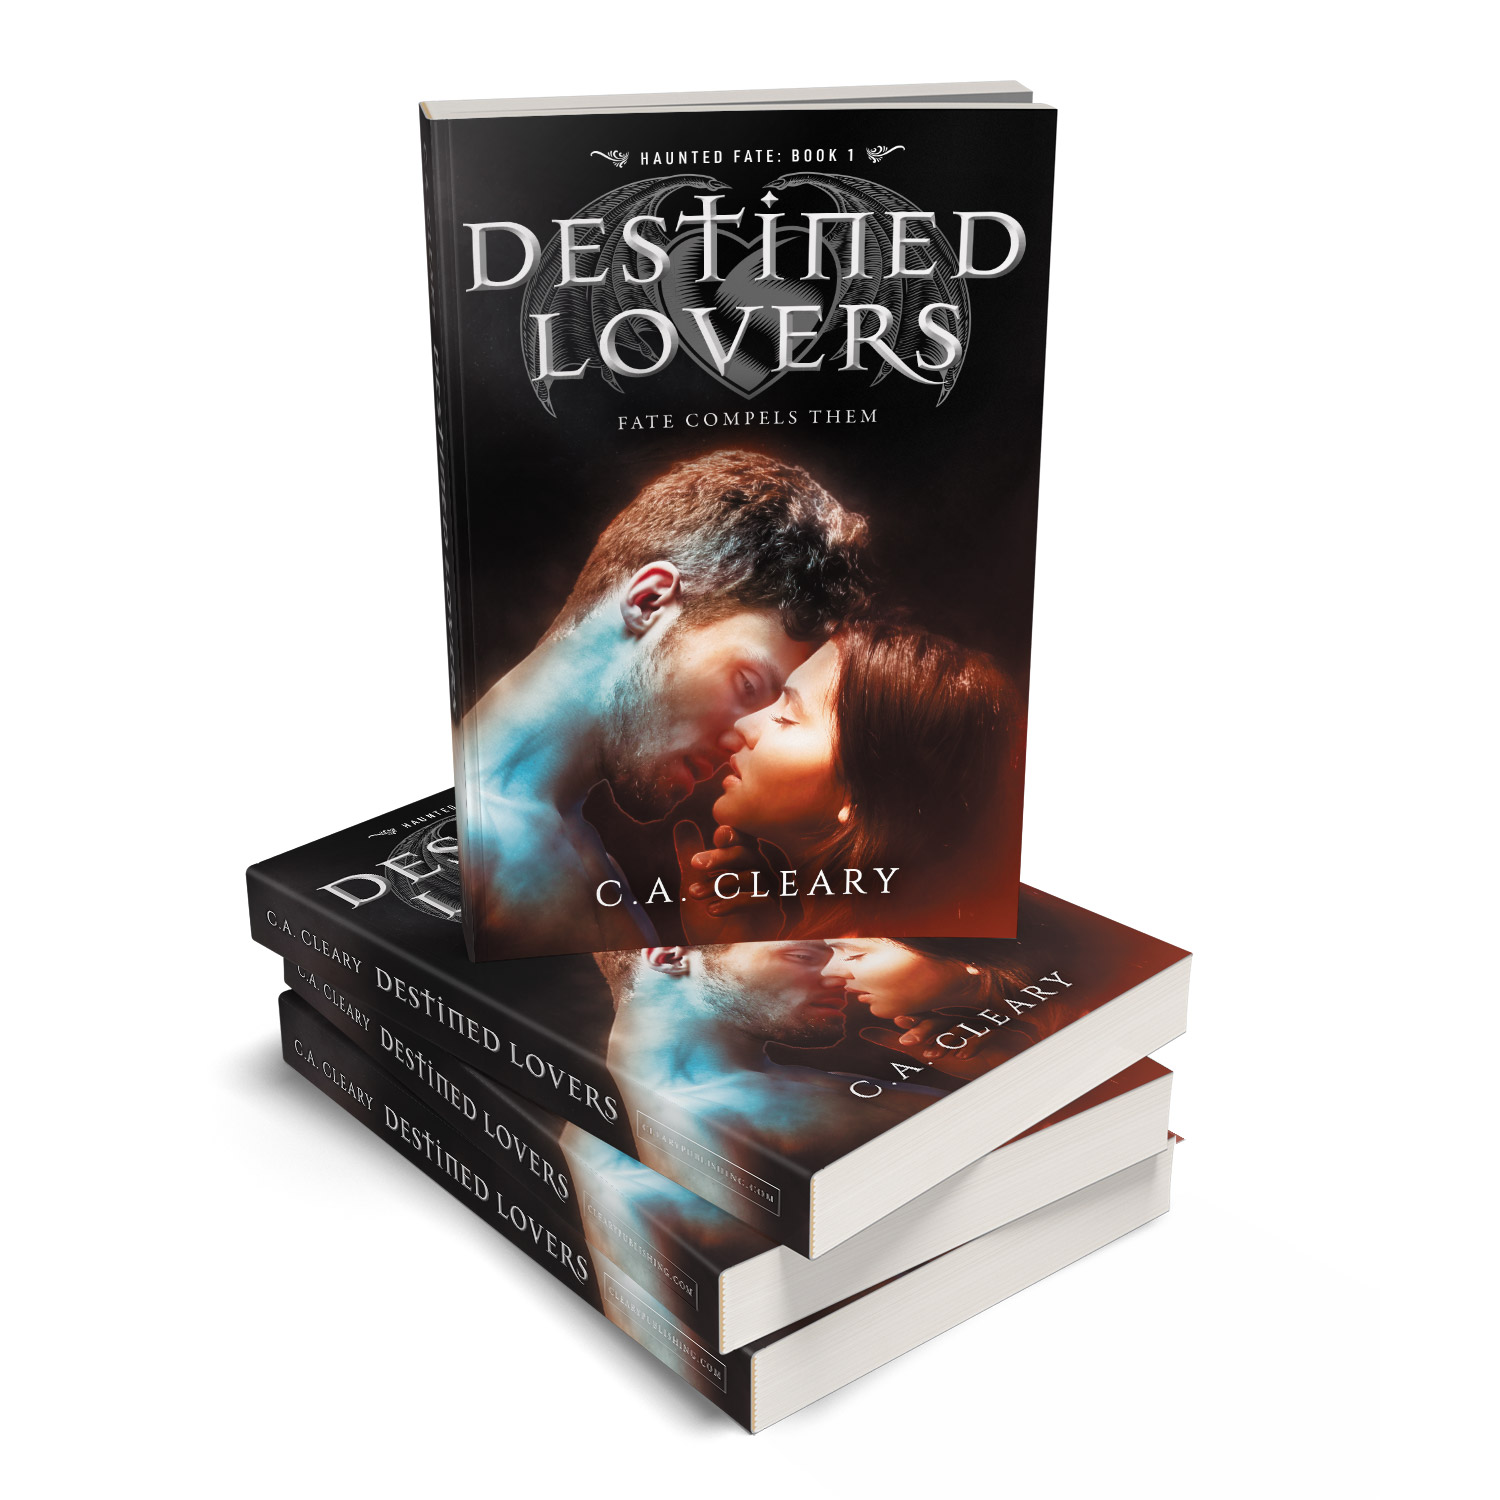 'Destined Lovers (Haunted Fate" Book 1)' is the first bite of a vampire series, by C.A. Cleary. The book cover and interior were designed by Mark Thomas of coverness.com. To find out more about my book design services, please visit www.coverness.com